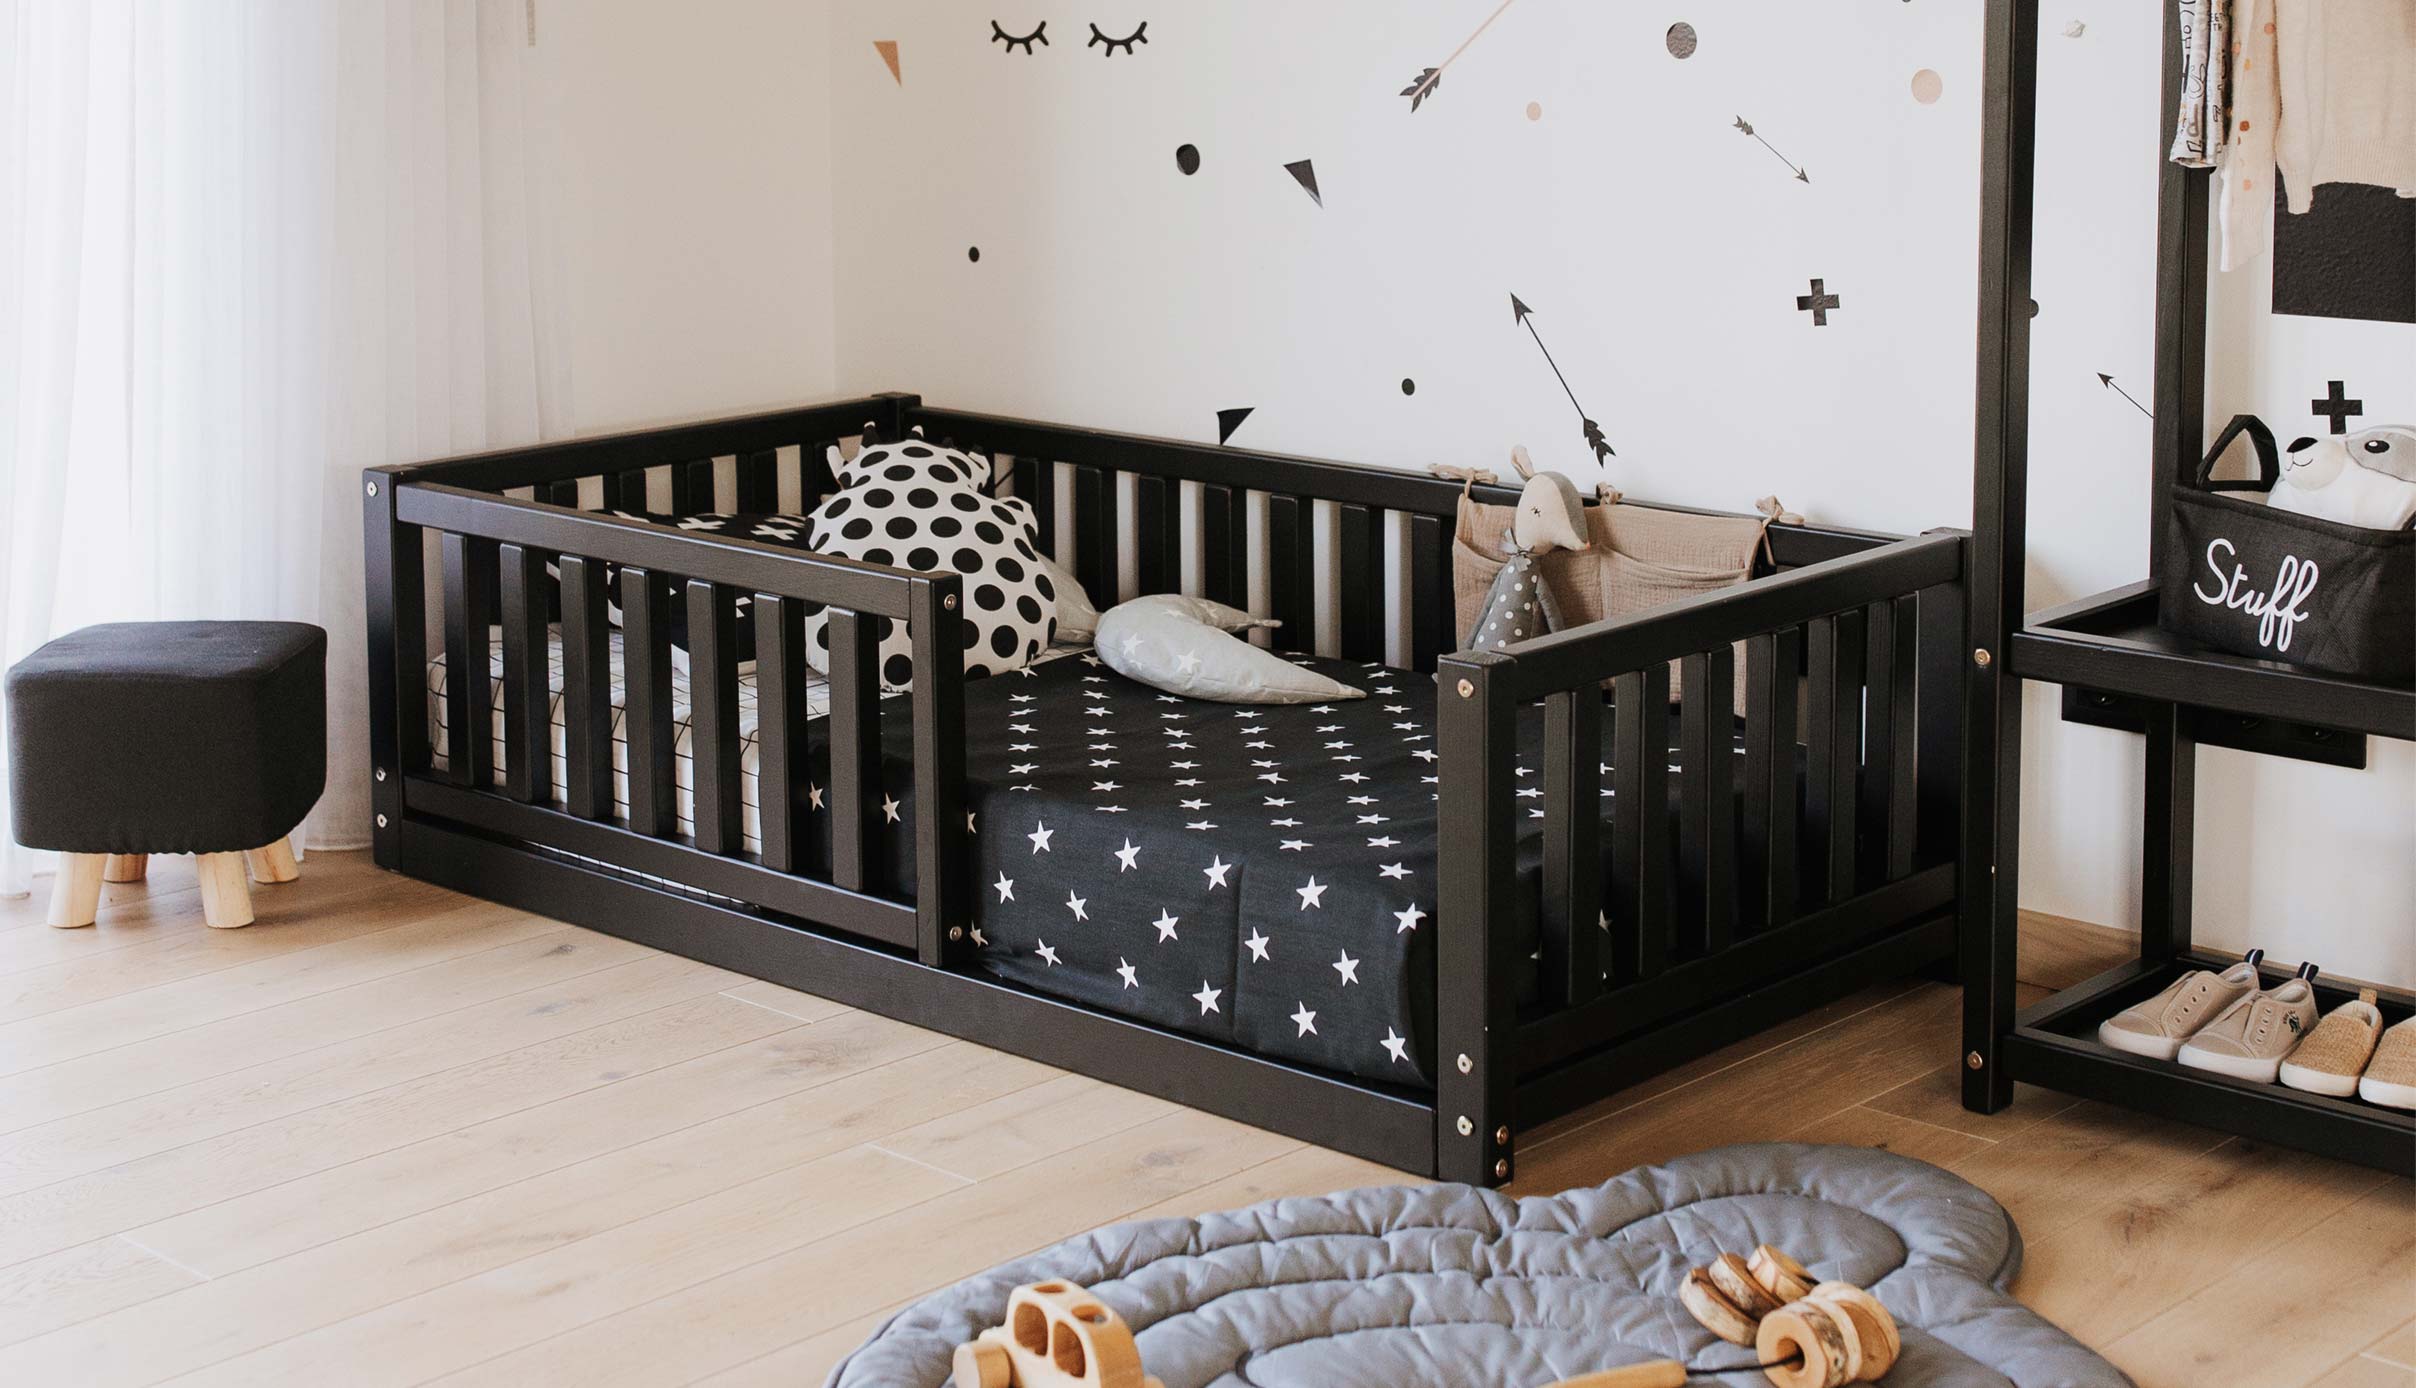 A baby's room with a black crib and black and white decor.